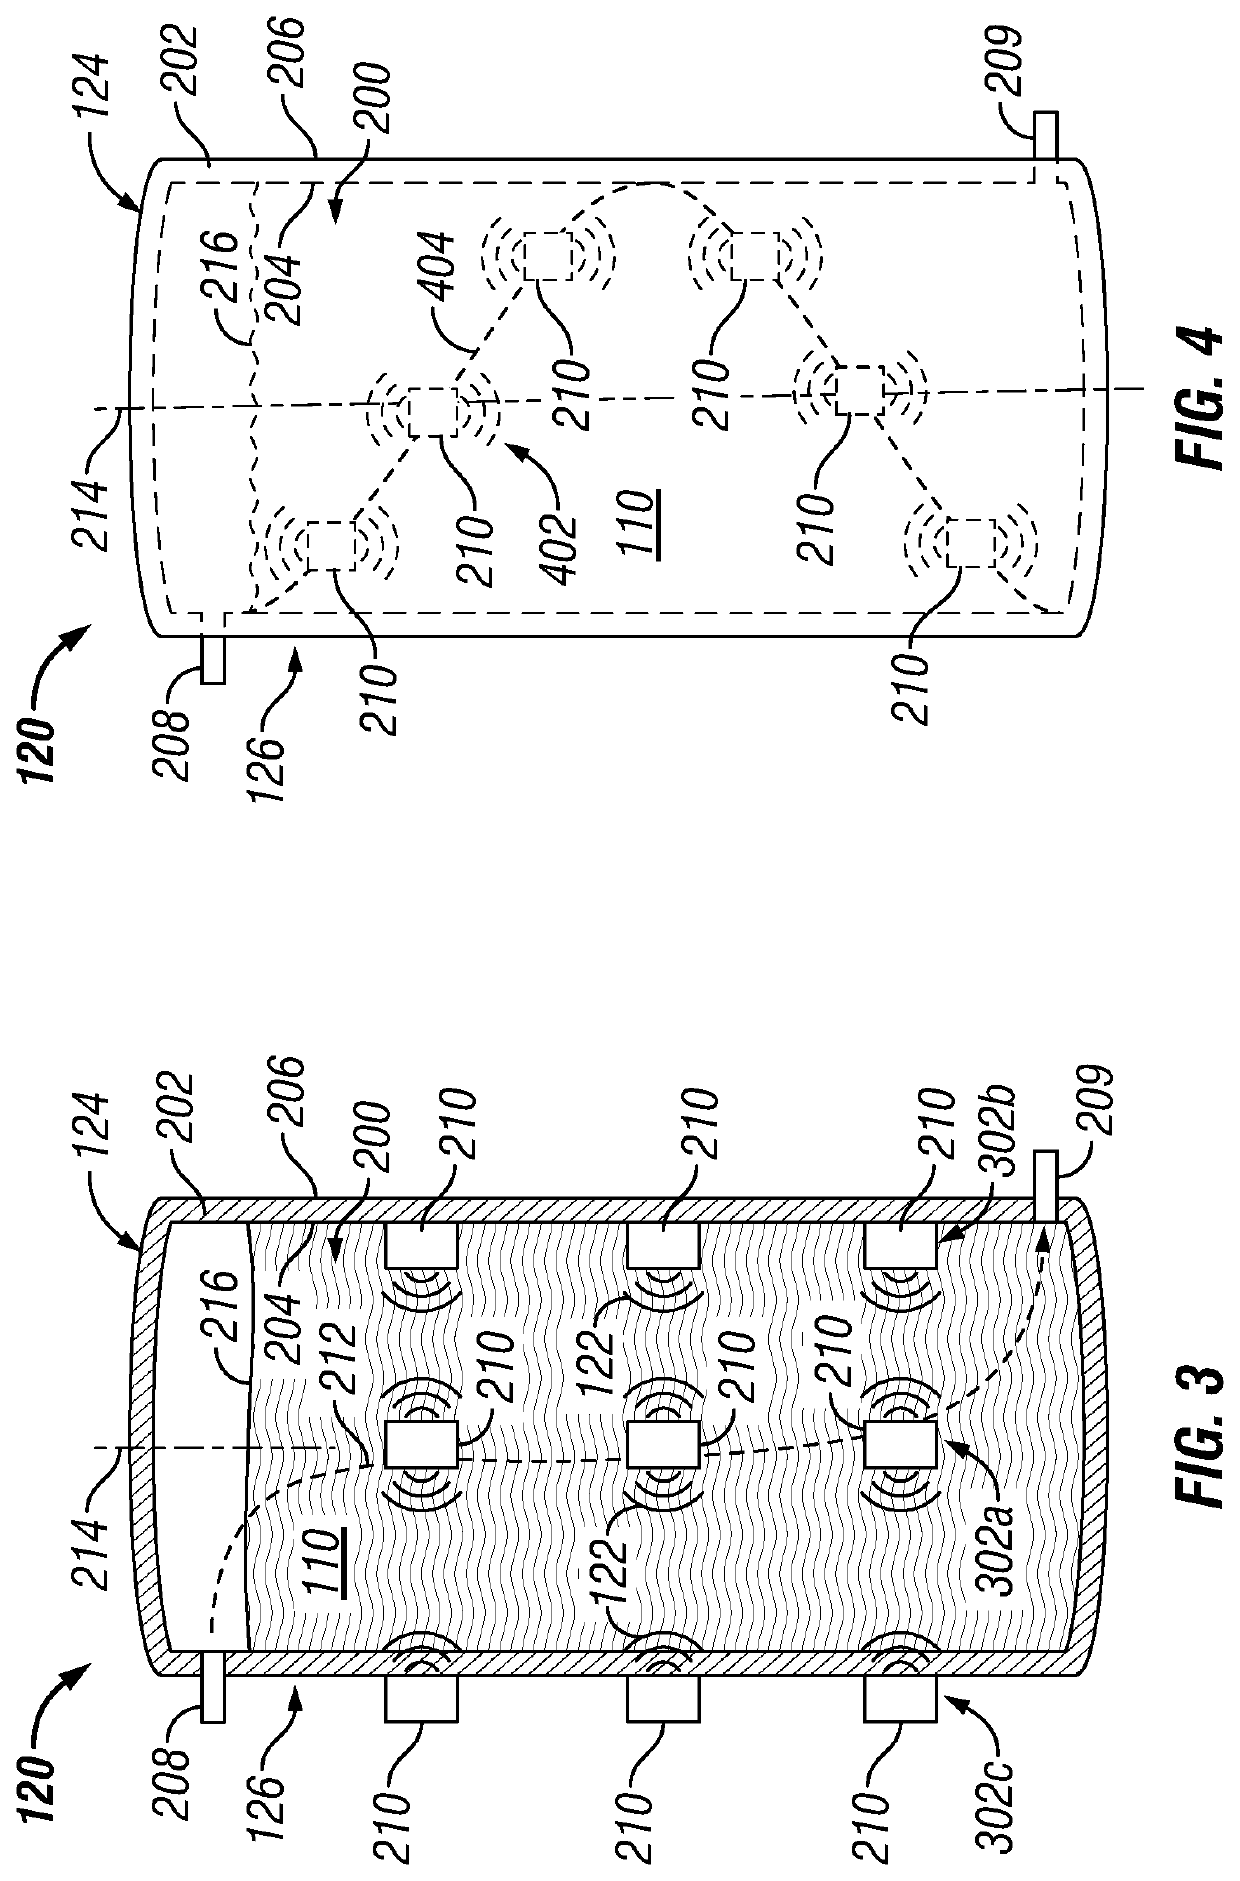 Ultrasonic degassing of hydrocarbon production fluid